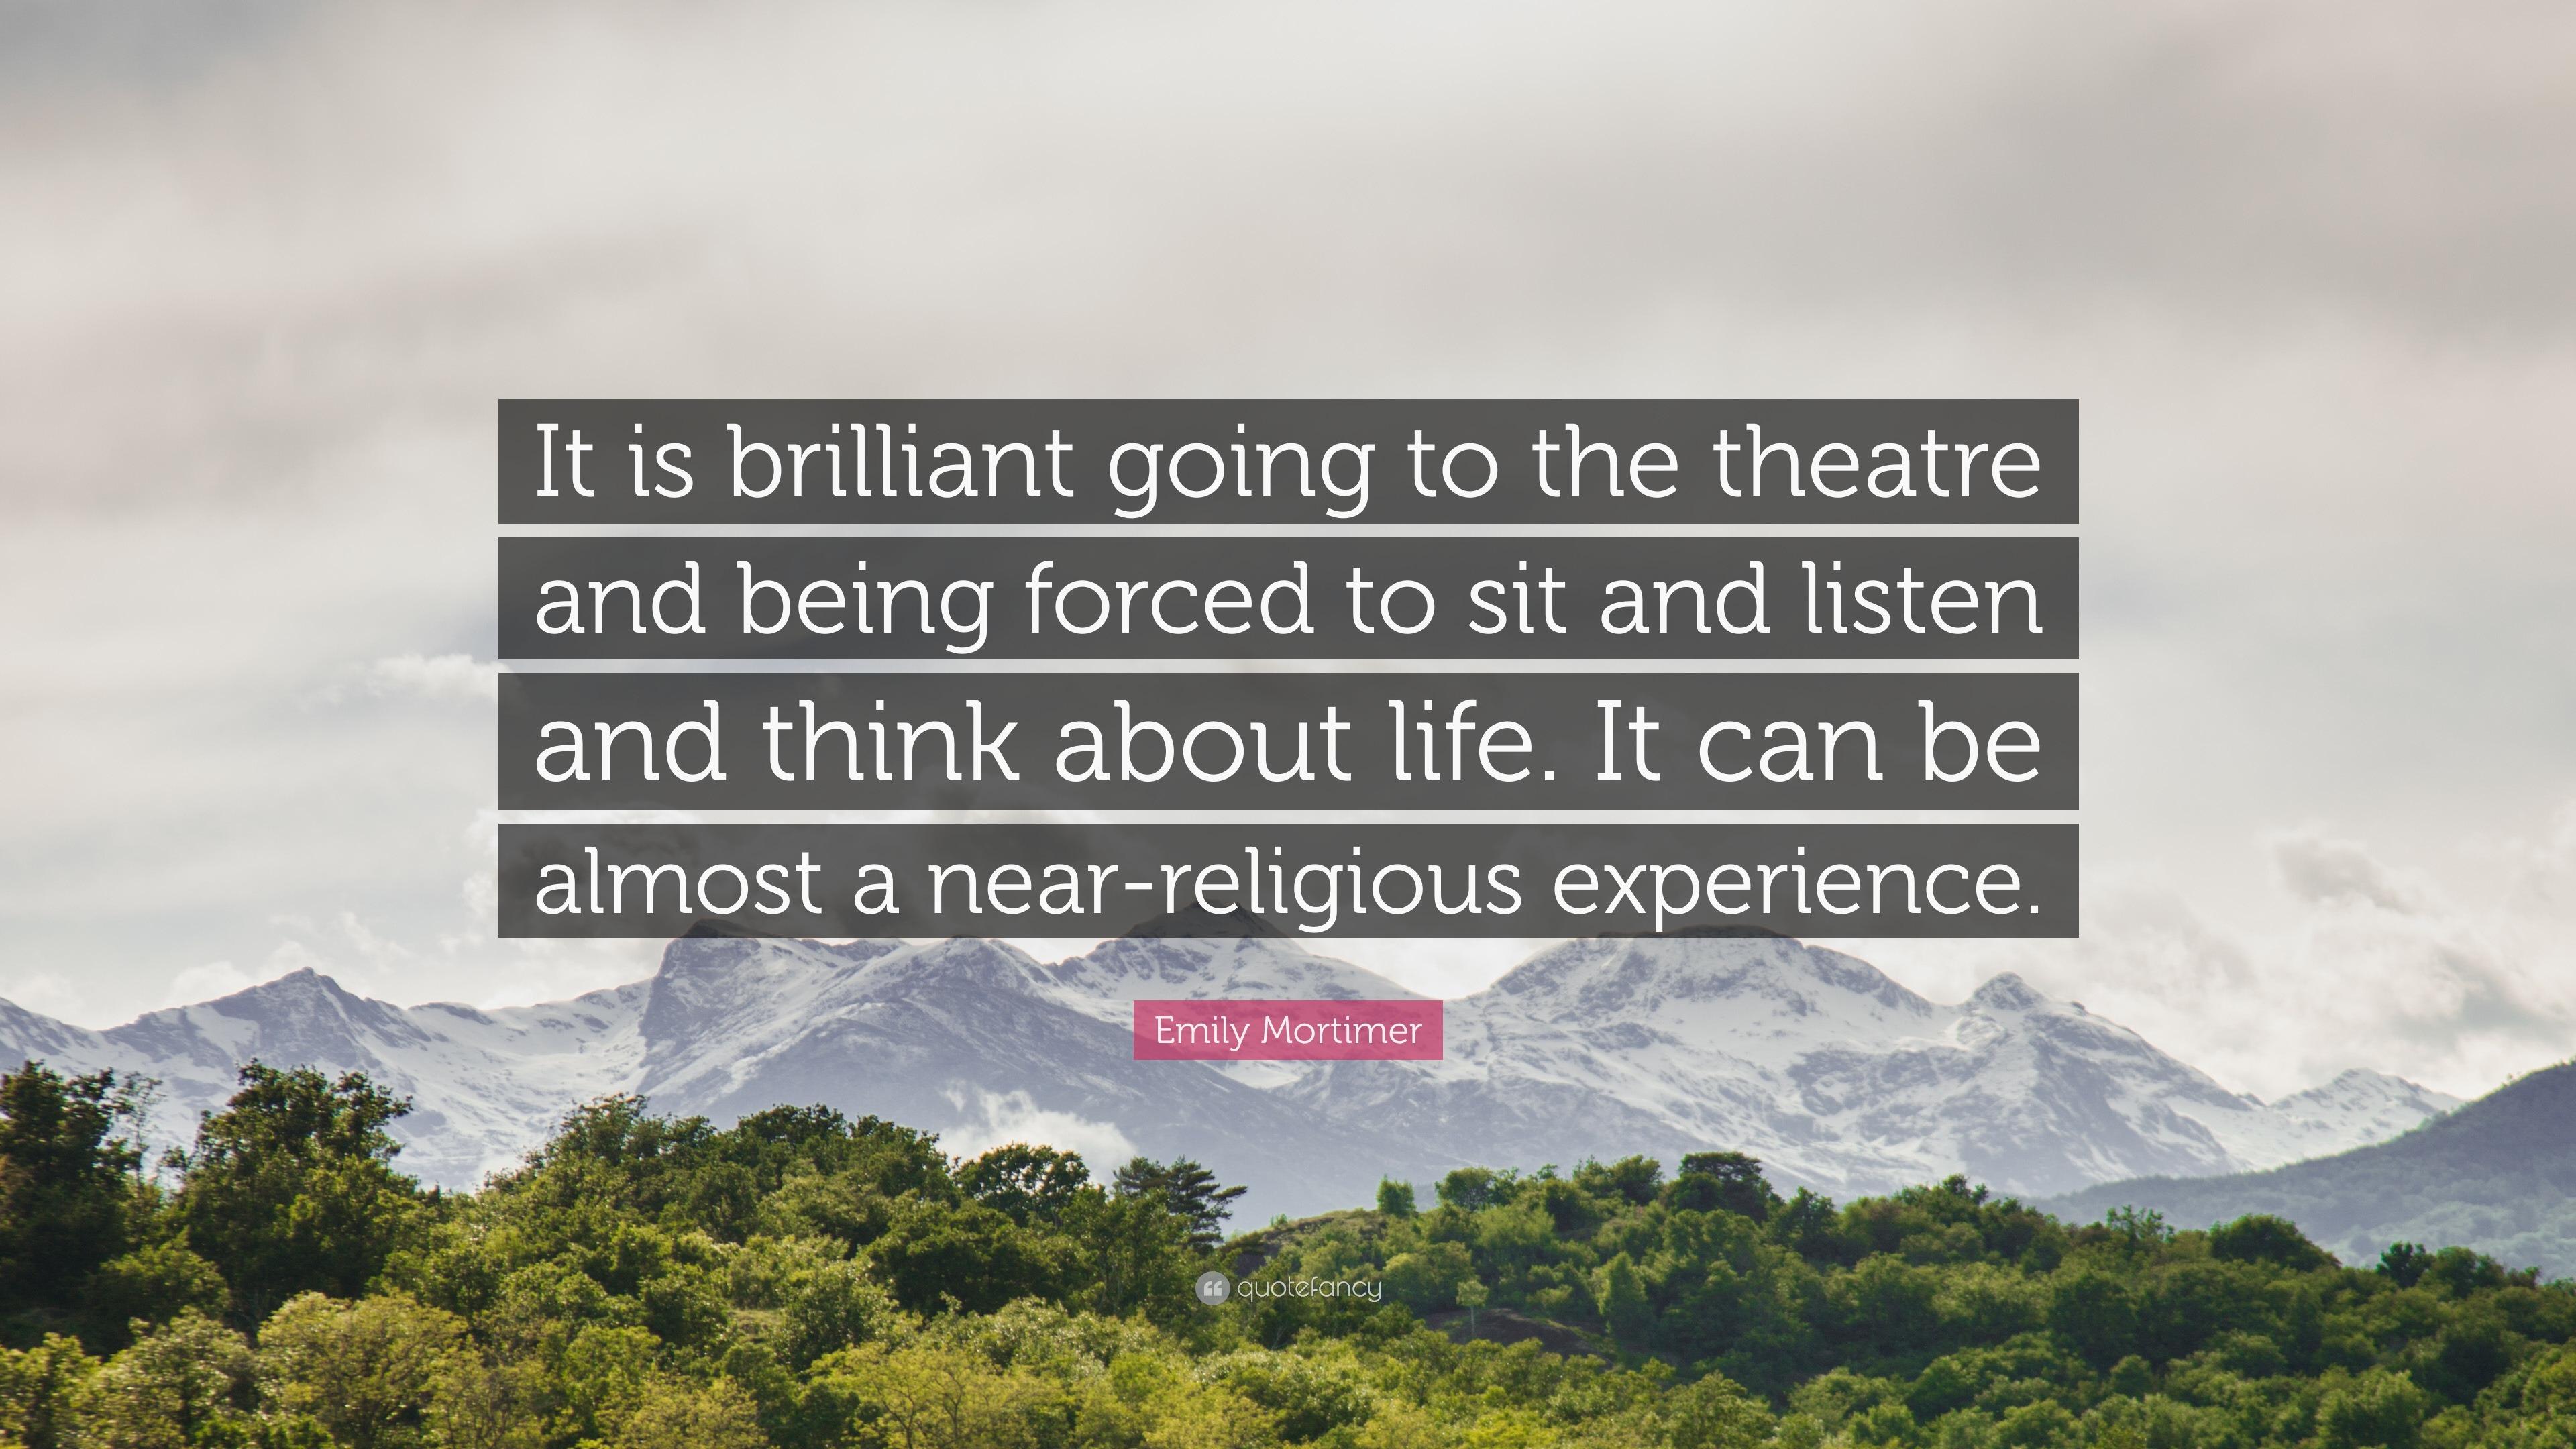 Emily Mortimer Quote: “It is brilliant going to the theatre and being  forced to sit and listen and think about life. It can be almost a  near-re...”